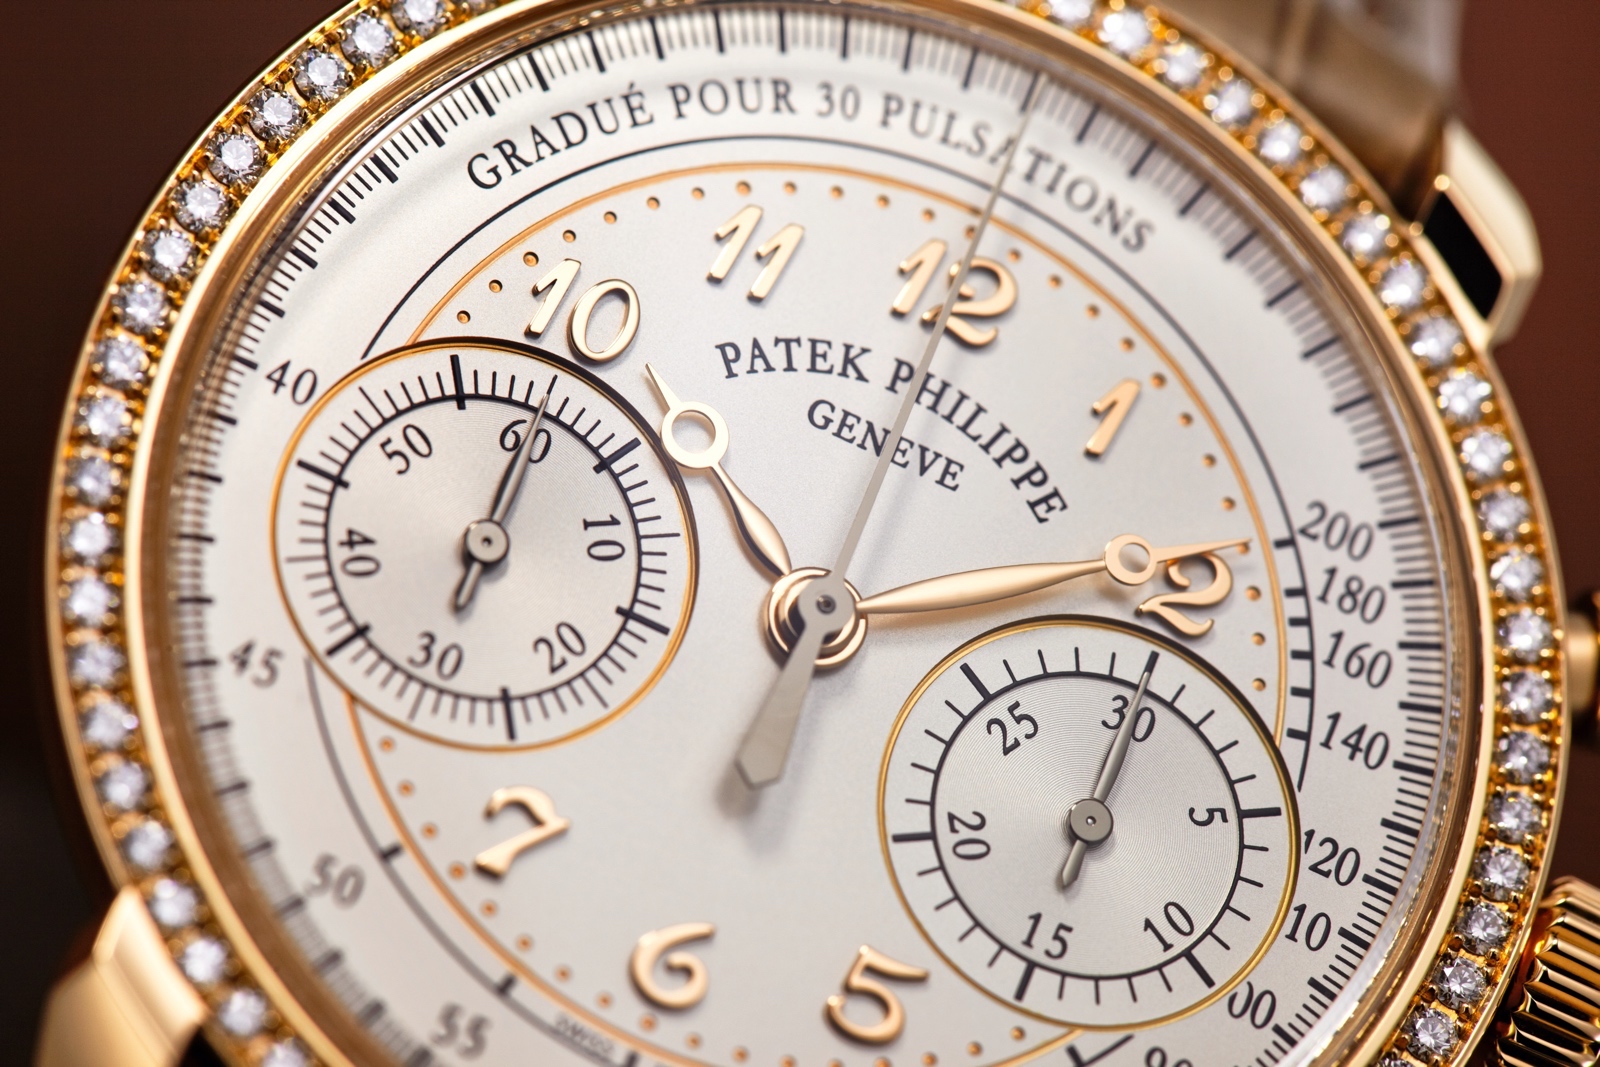 The exquisite silver dials have classic and delicate designs, revealing a great beauty. 